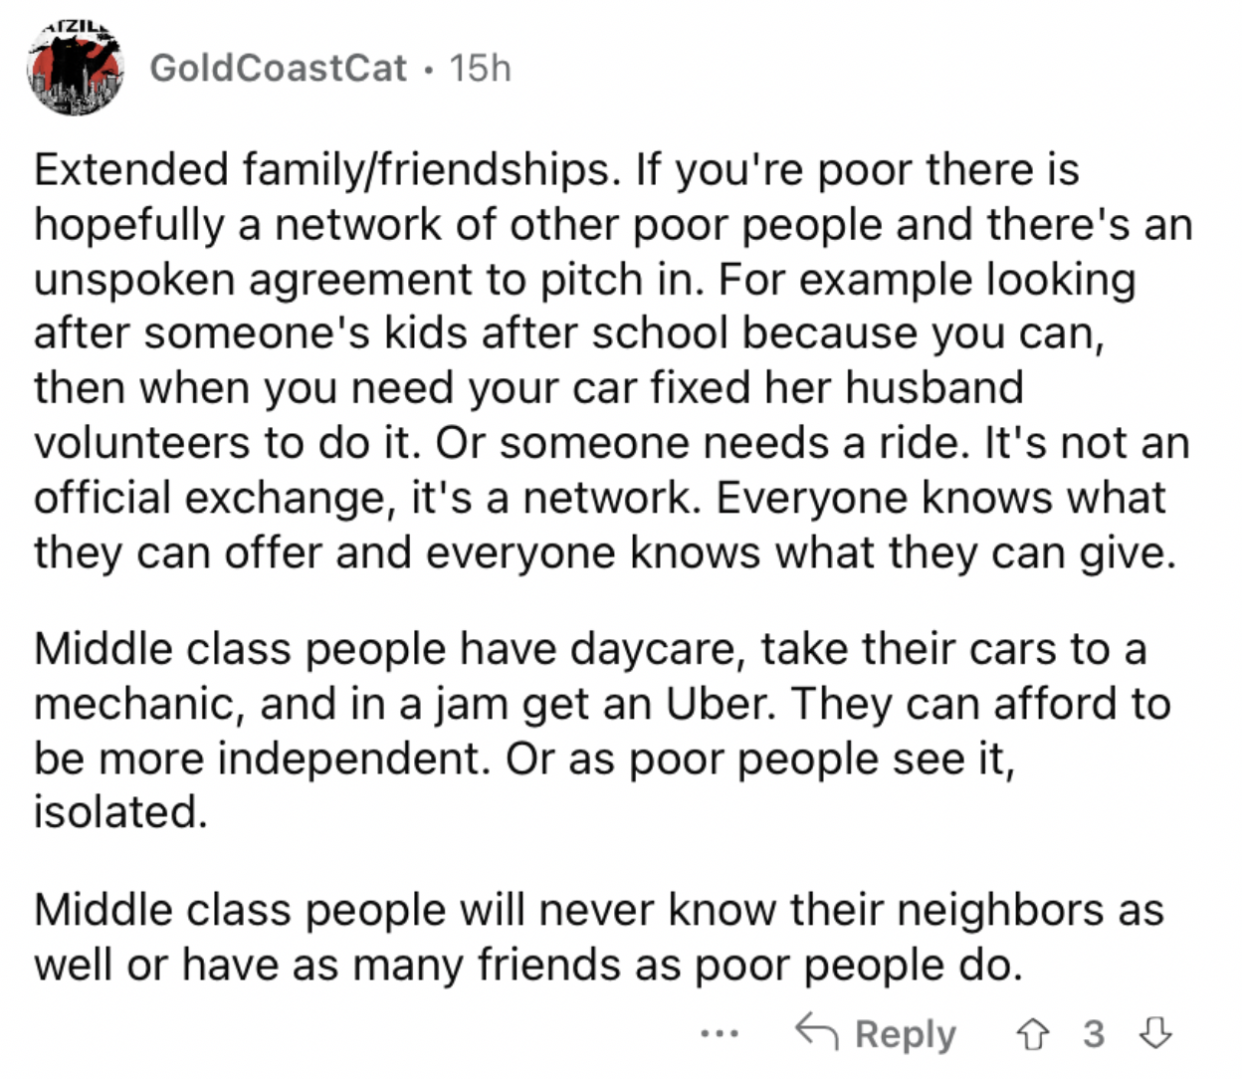 Reddit screenshot about poor people being closer to extended family.